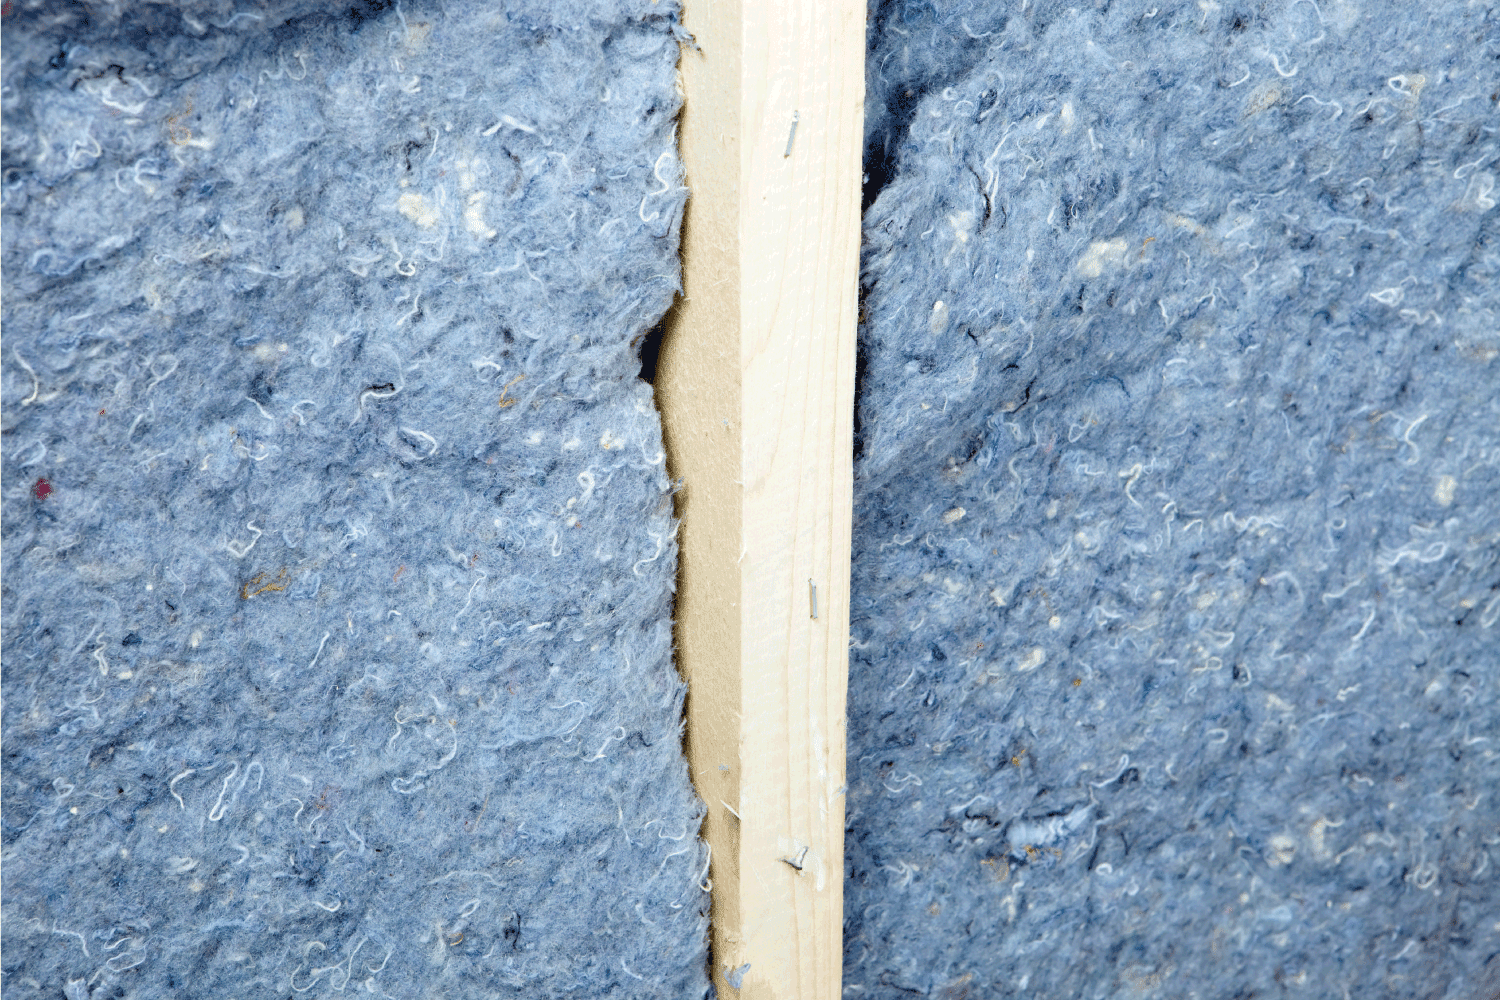 Two pieces of recycled blue jean denim insulation separated by a wall stud